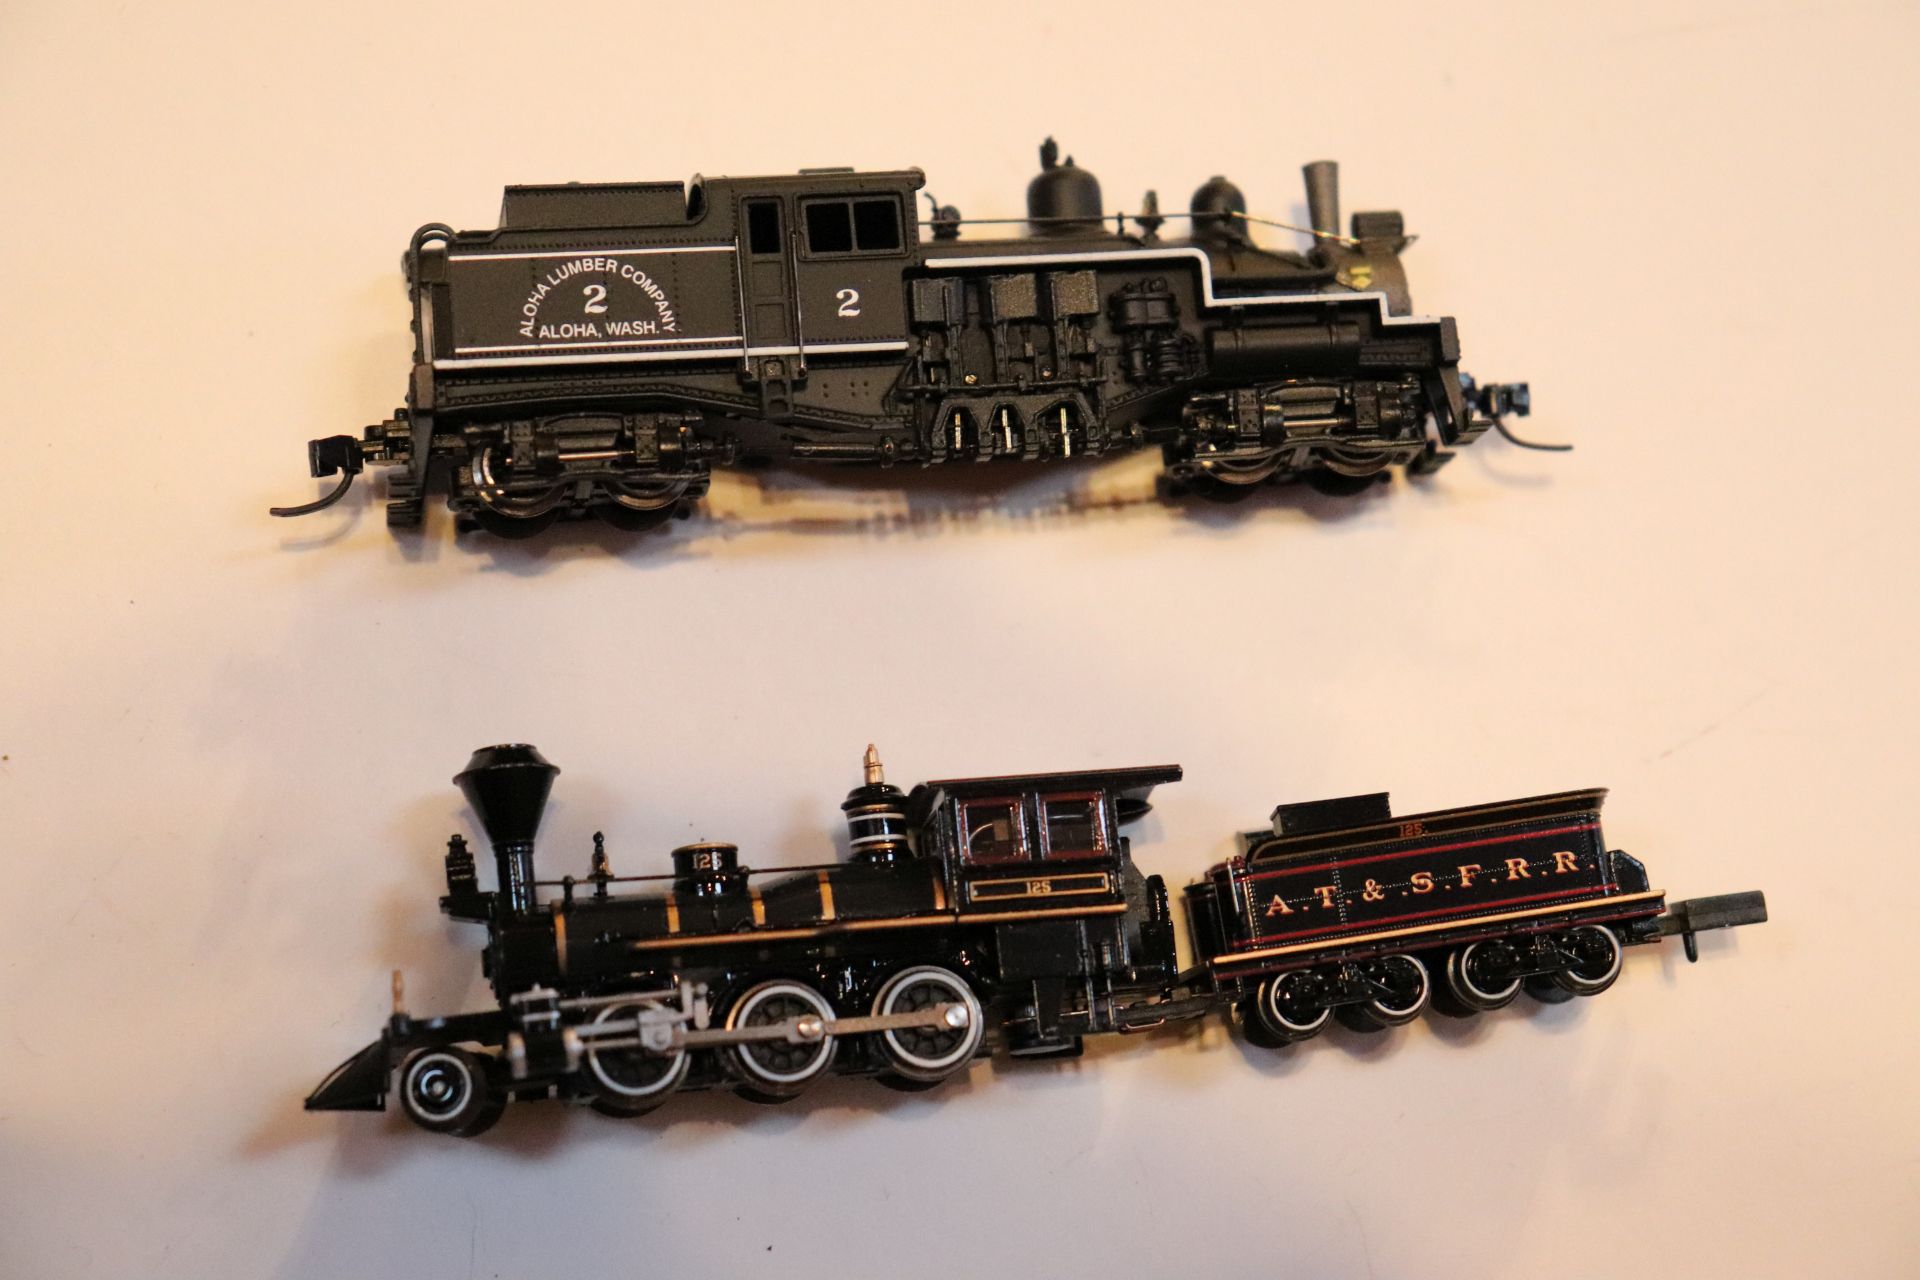 Two N scale locomotives